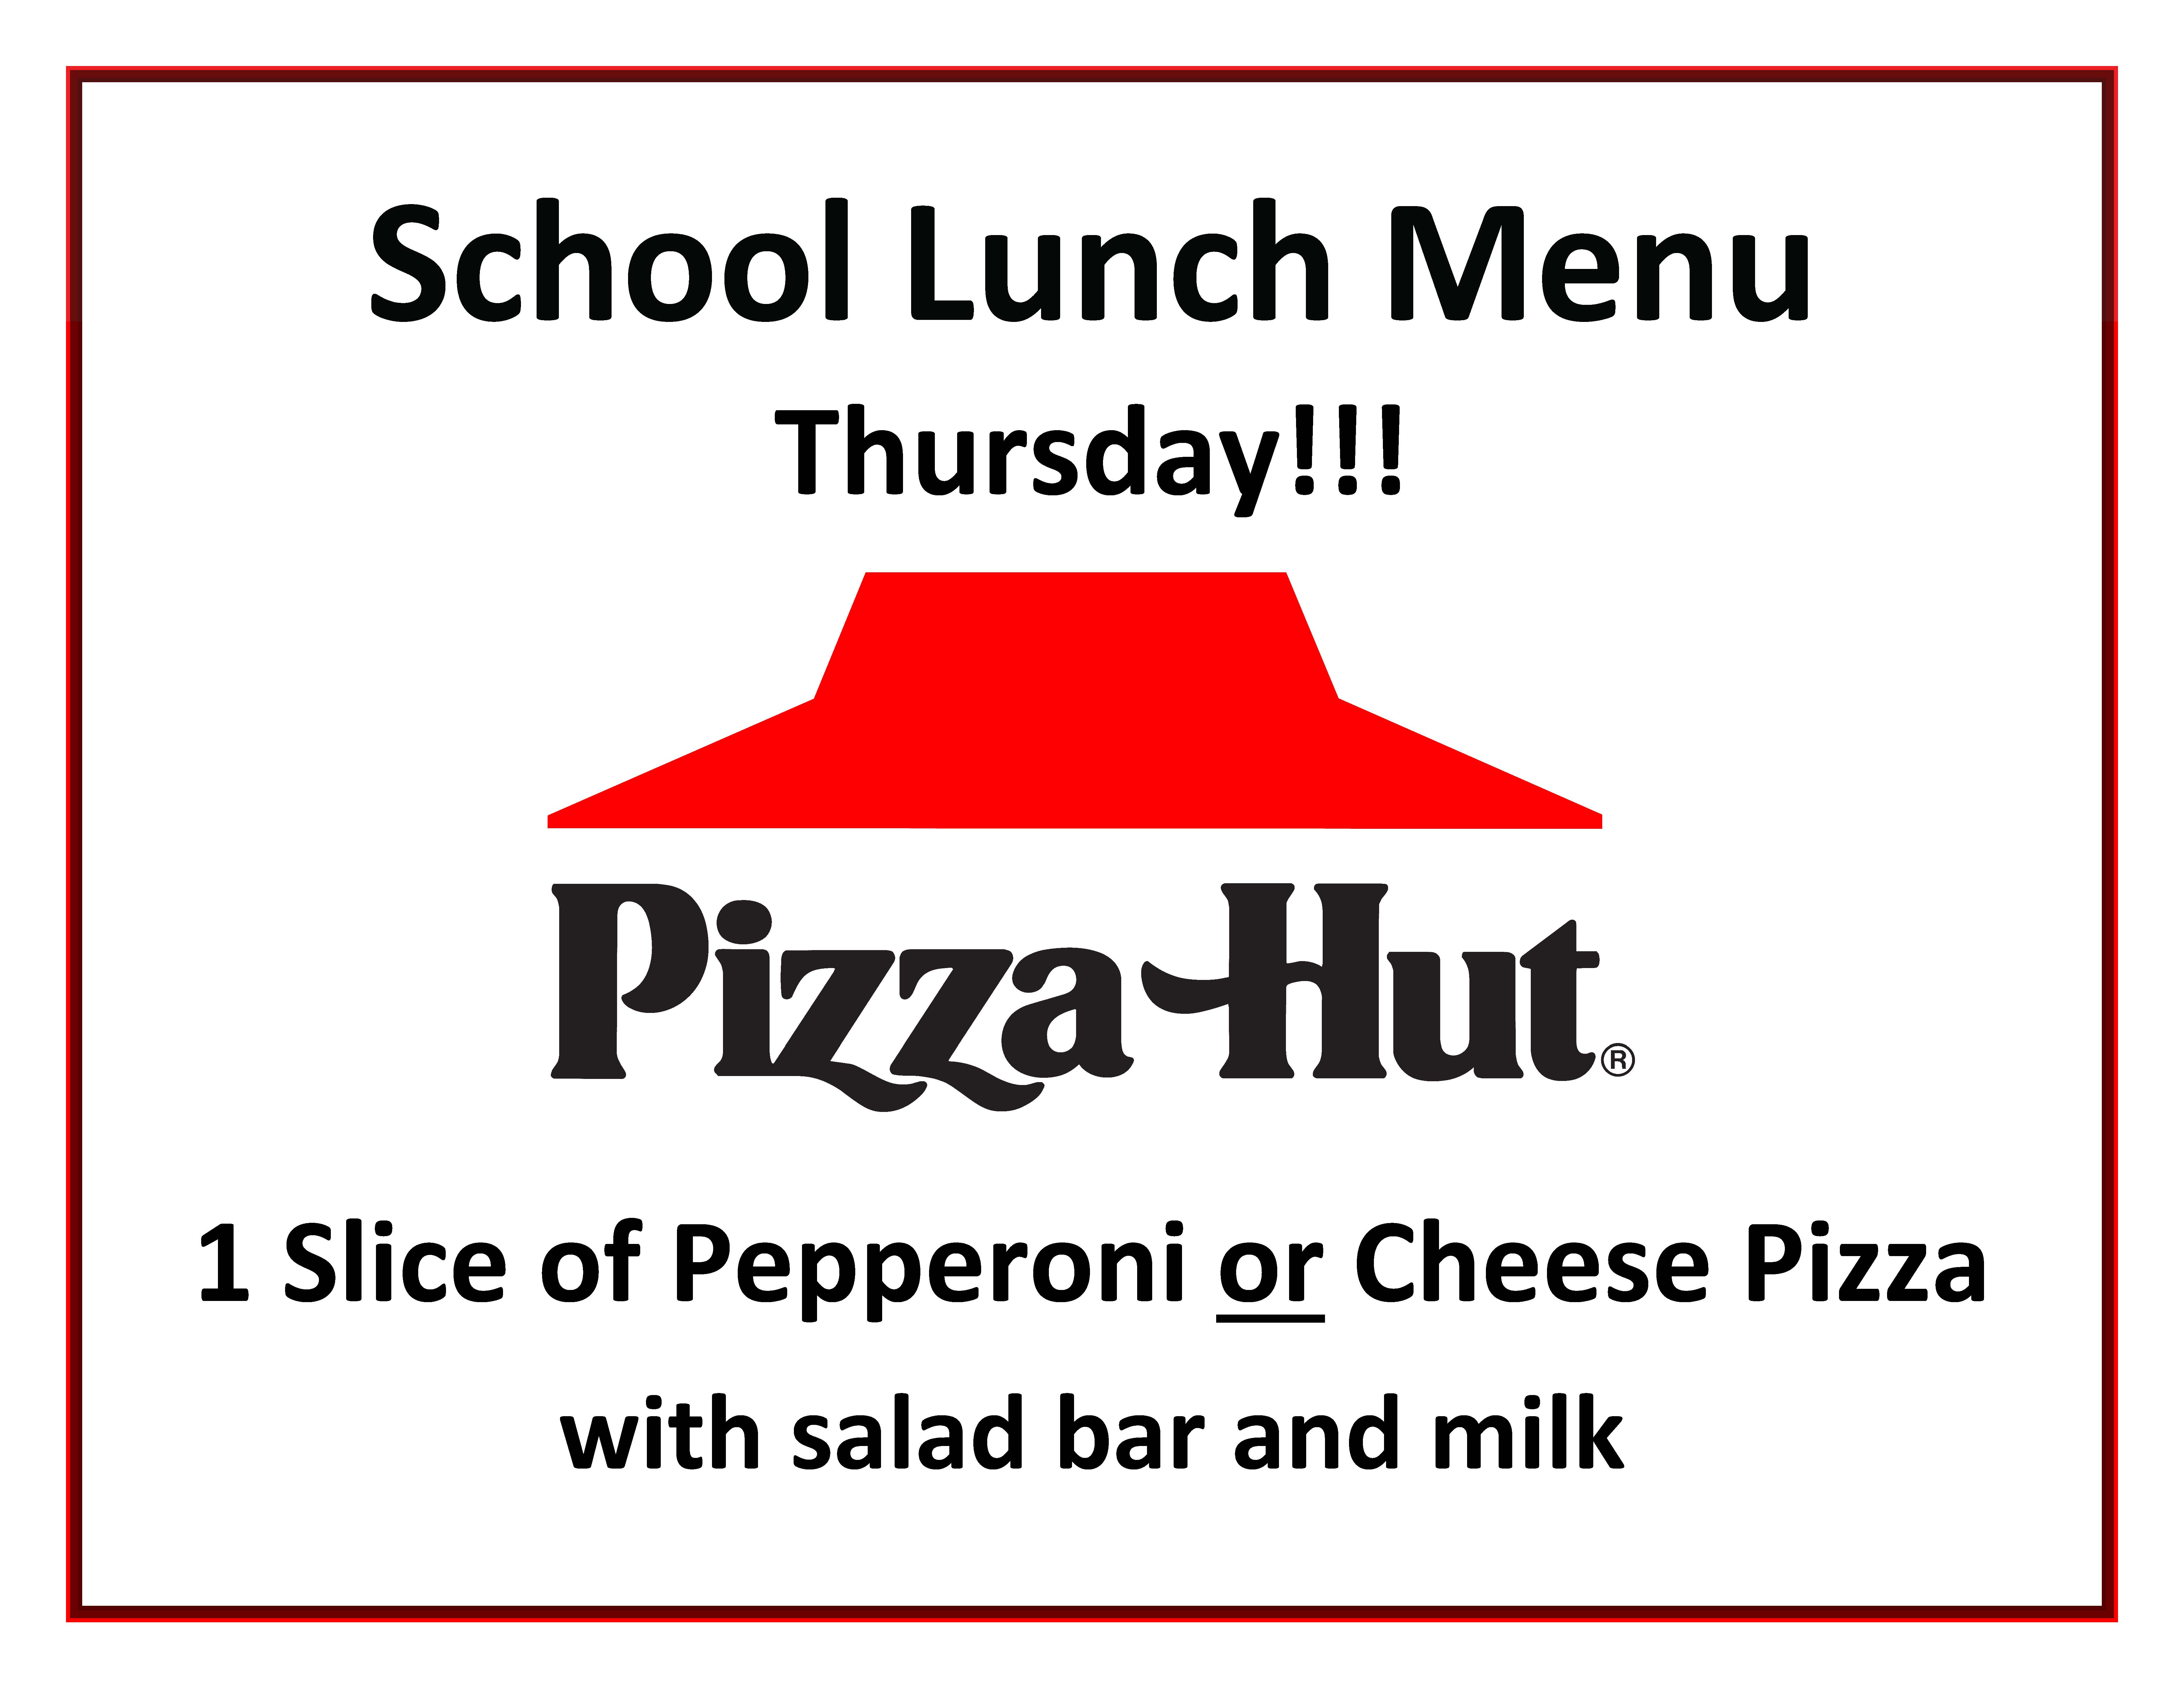 Pizza Hut Day in the school cafeteria- October 12